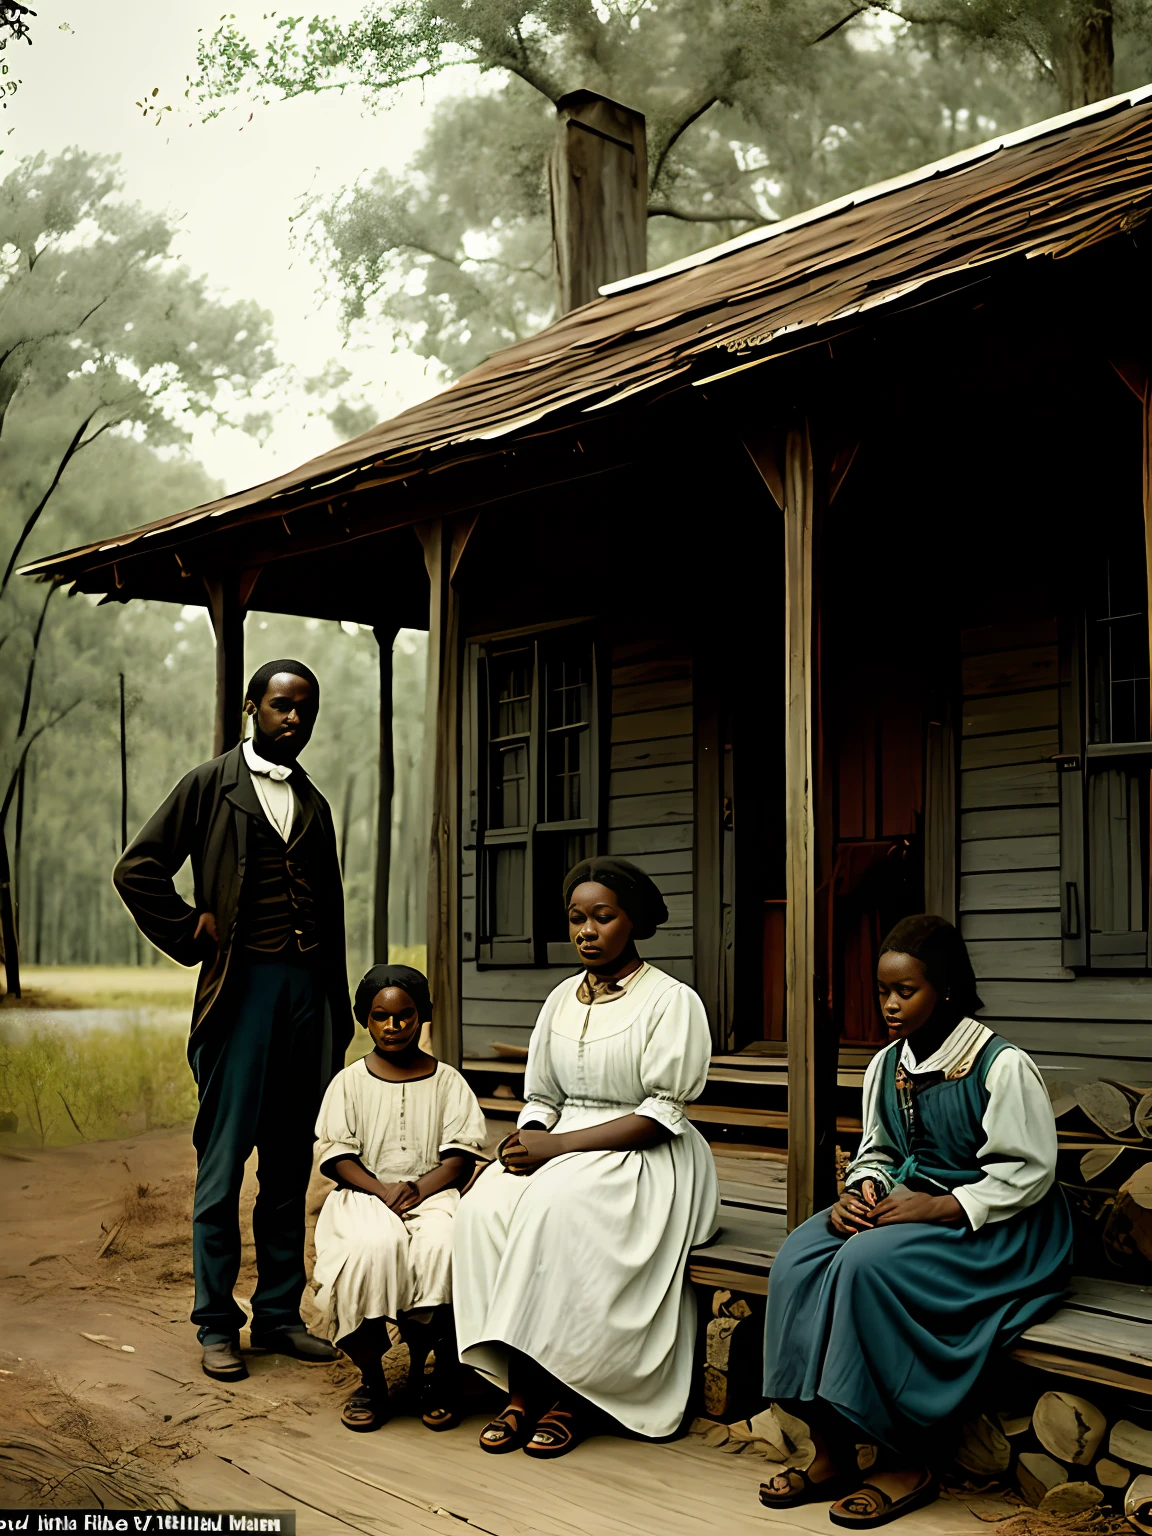 poor escaped slave family sitting on a porch in the great dismal 늪, 늪, 다큐멘터리 영화 퀄리티, 약간의 모션 블러, 영화 스틸, 19 세기